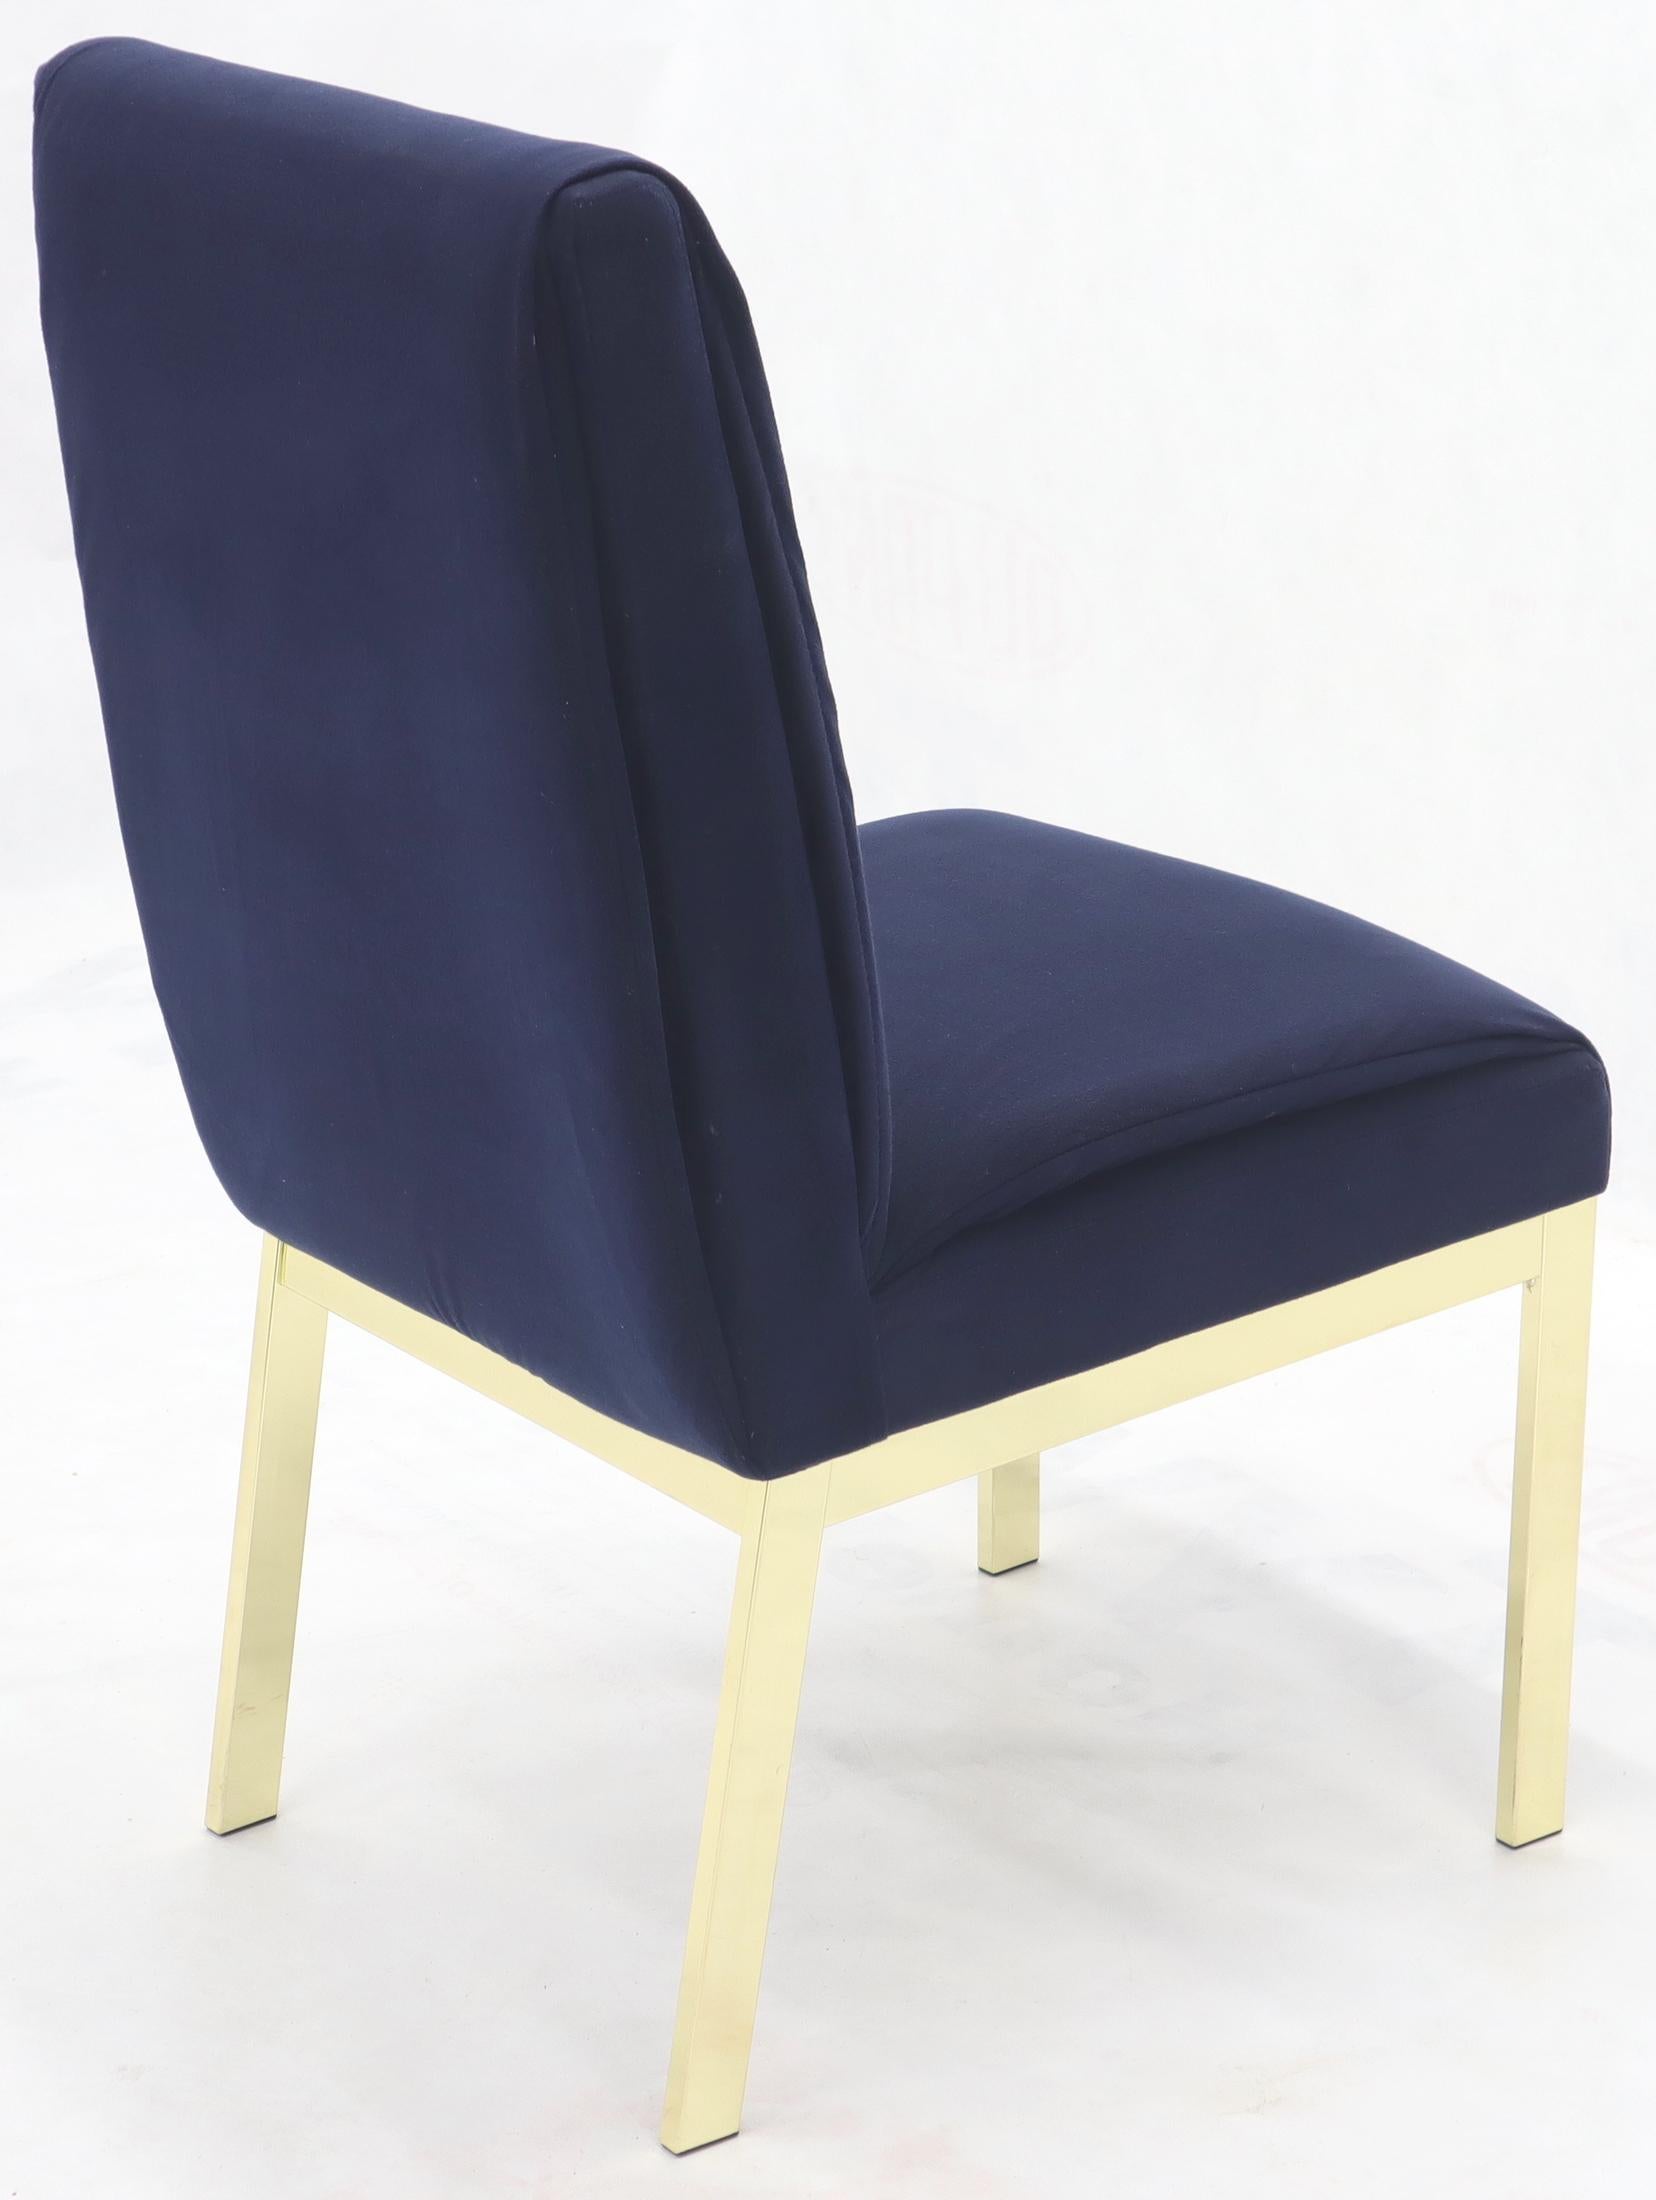 Set of 8 Mid-Century Modern blue upholstery dining chairs by DIA. Probably designed by Milo Baughman.